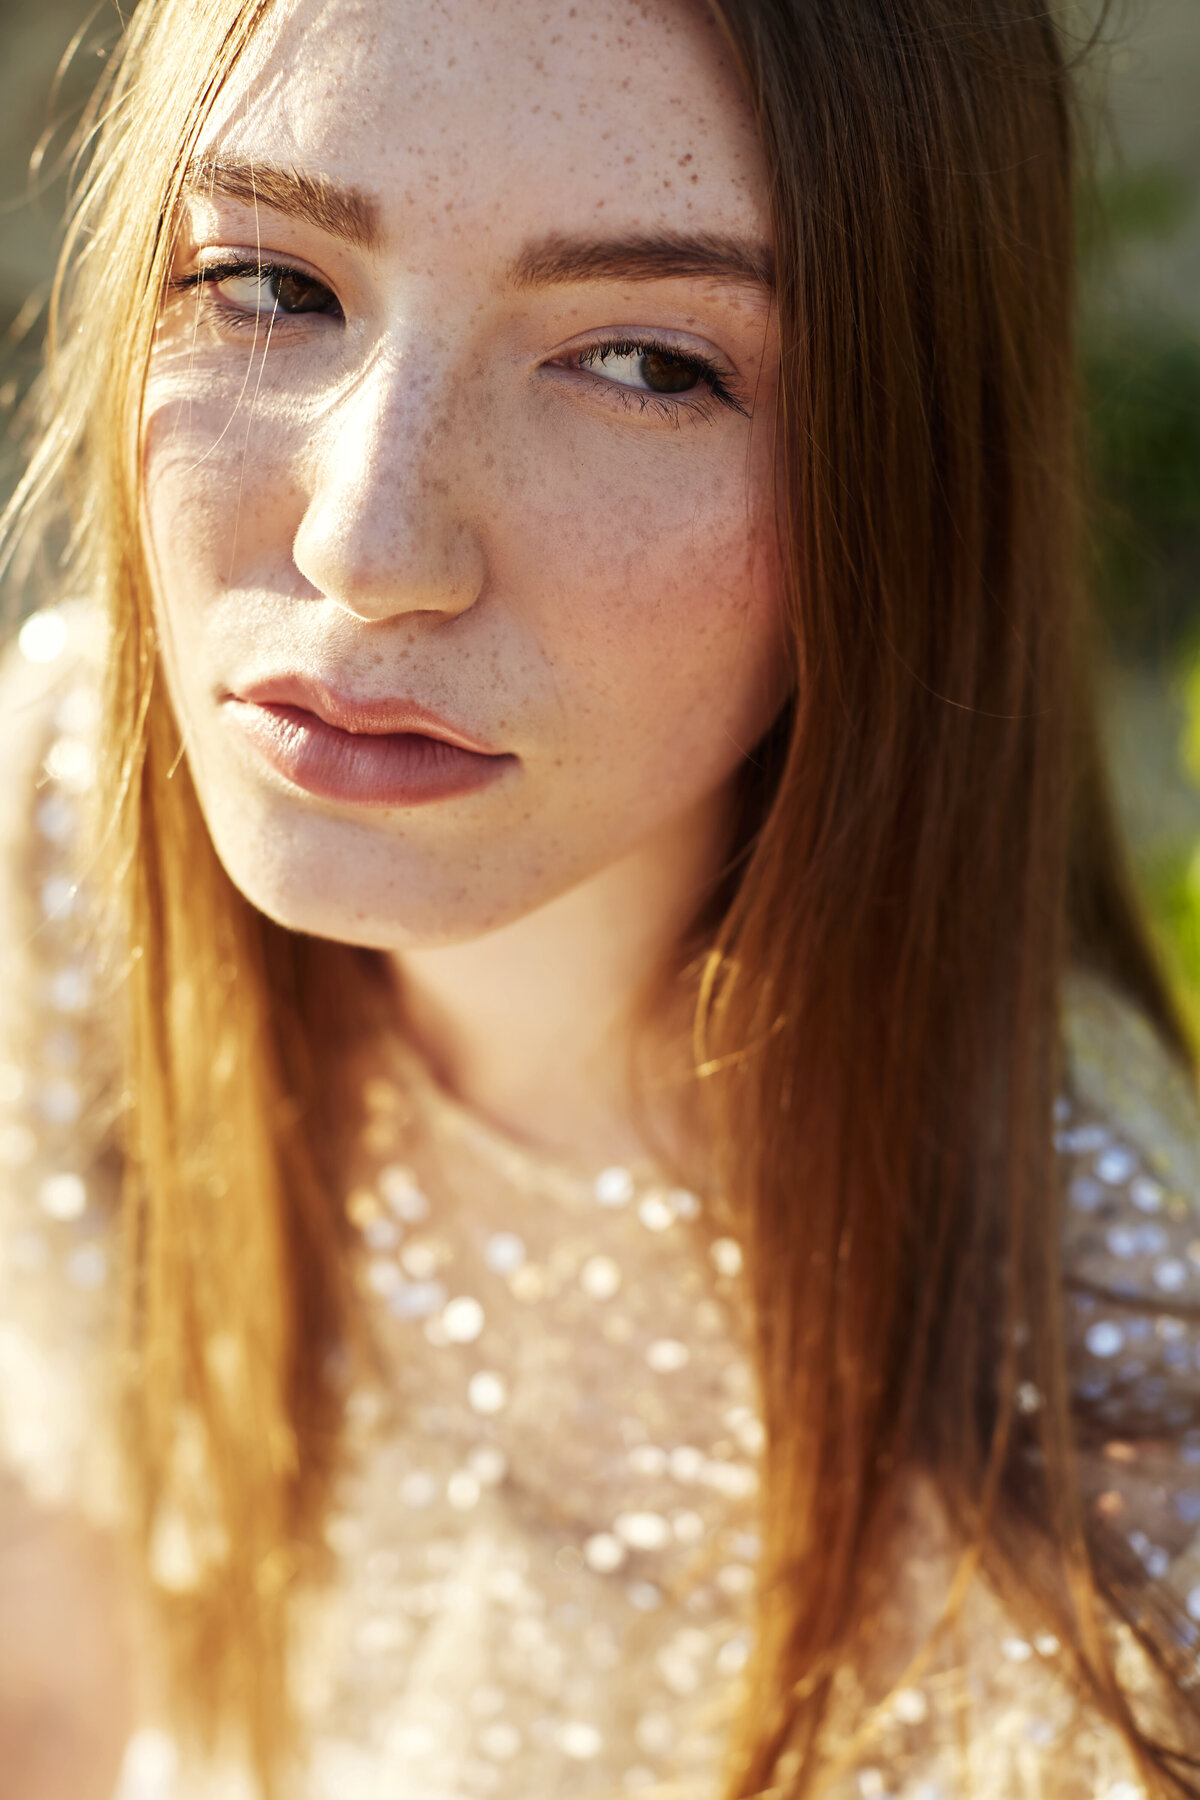 Makeup on Model with Freckles